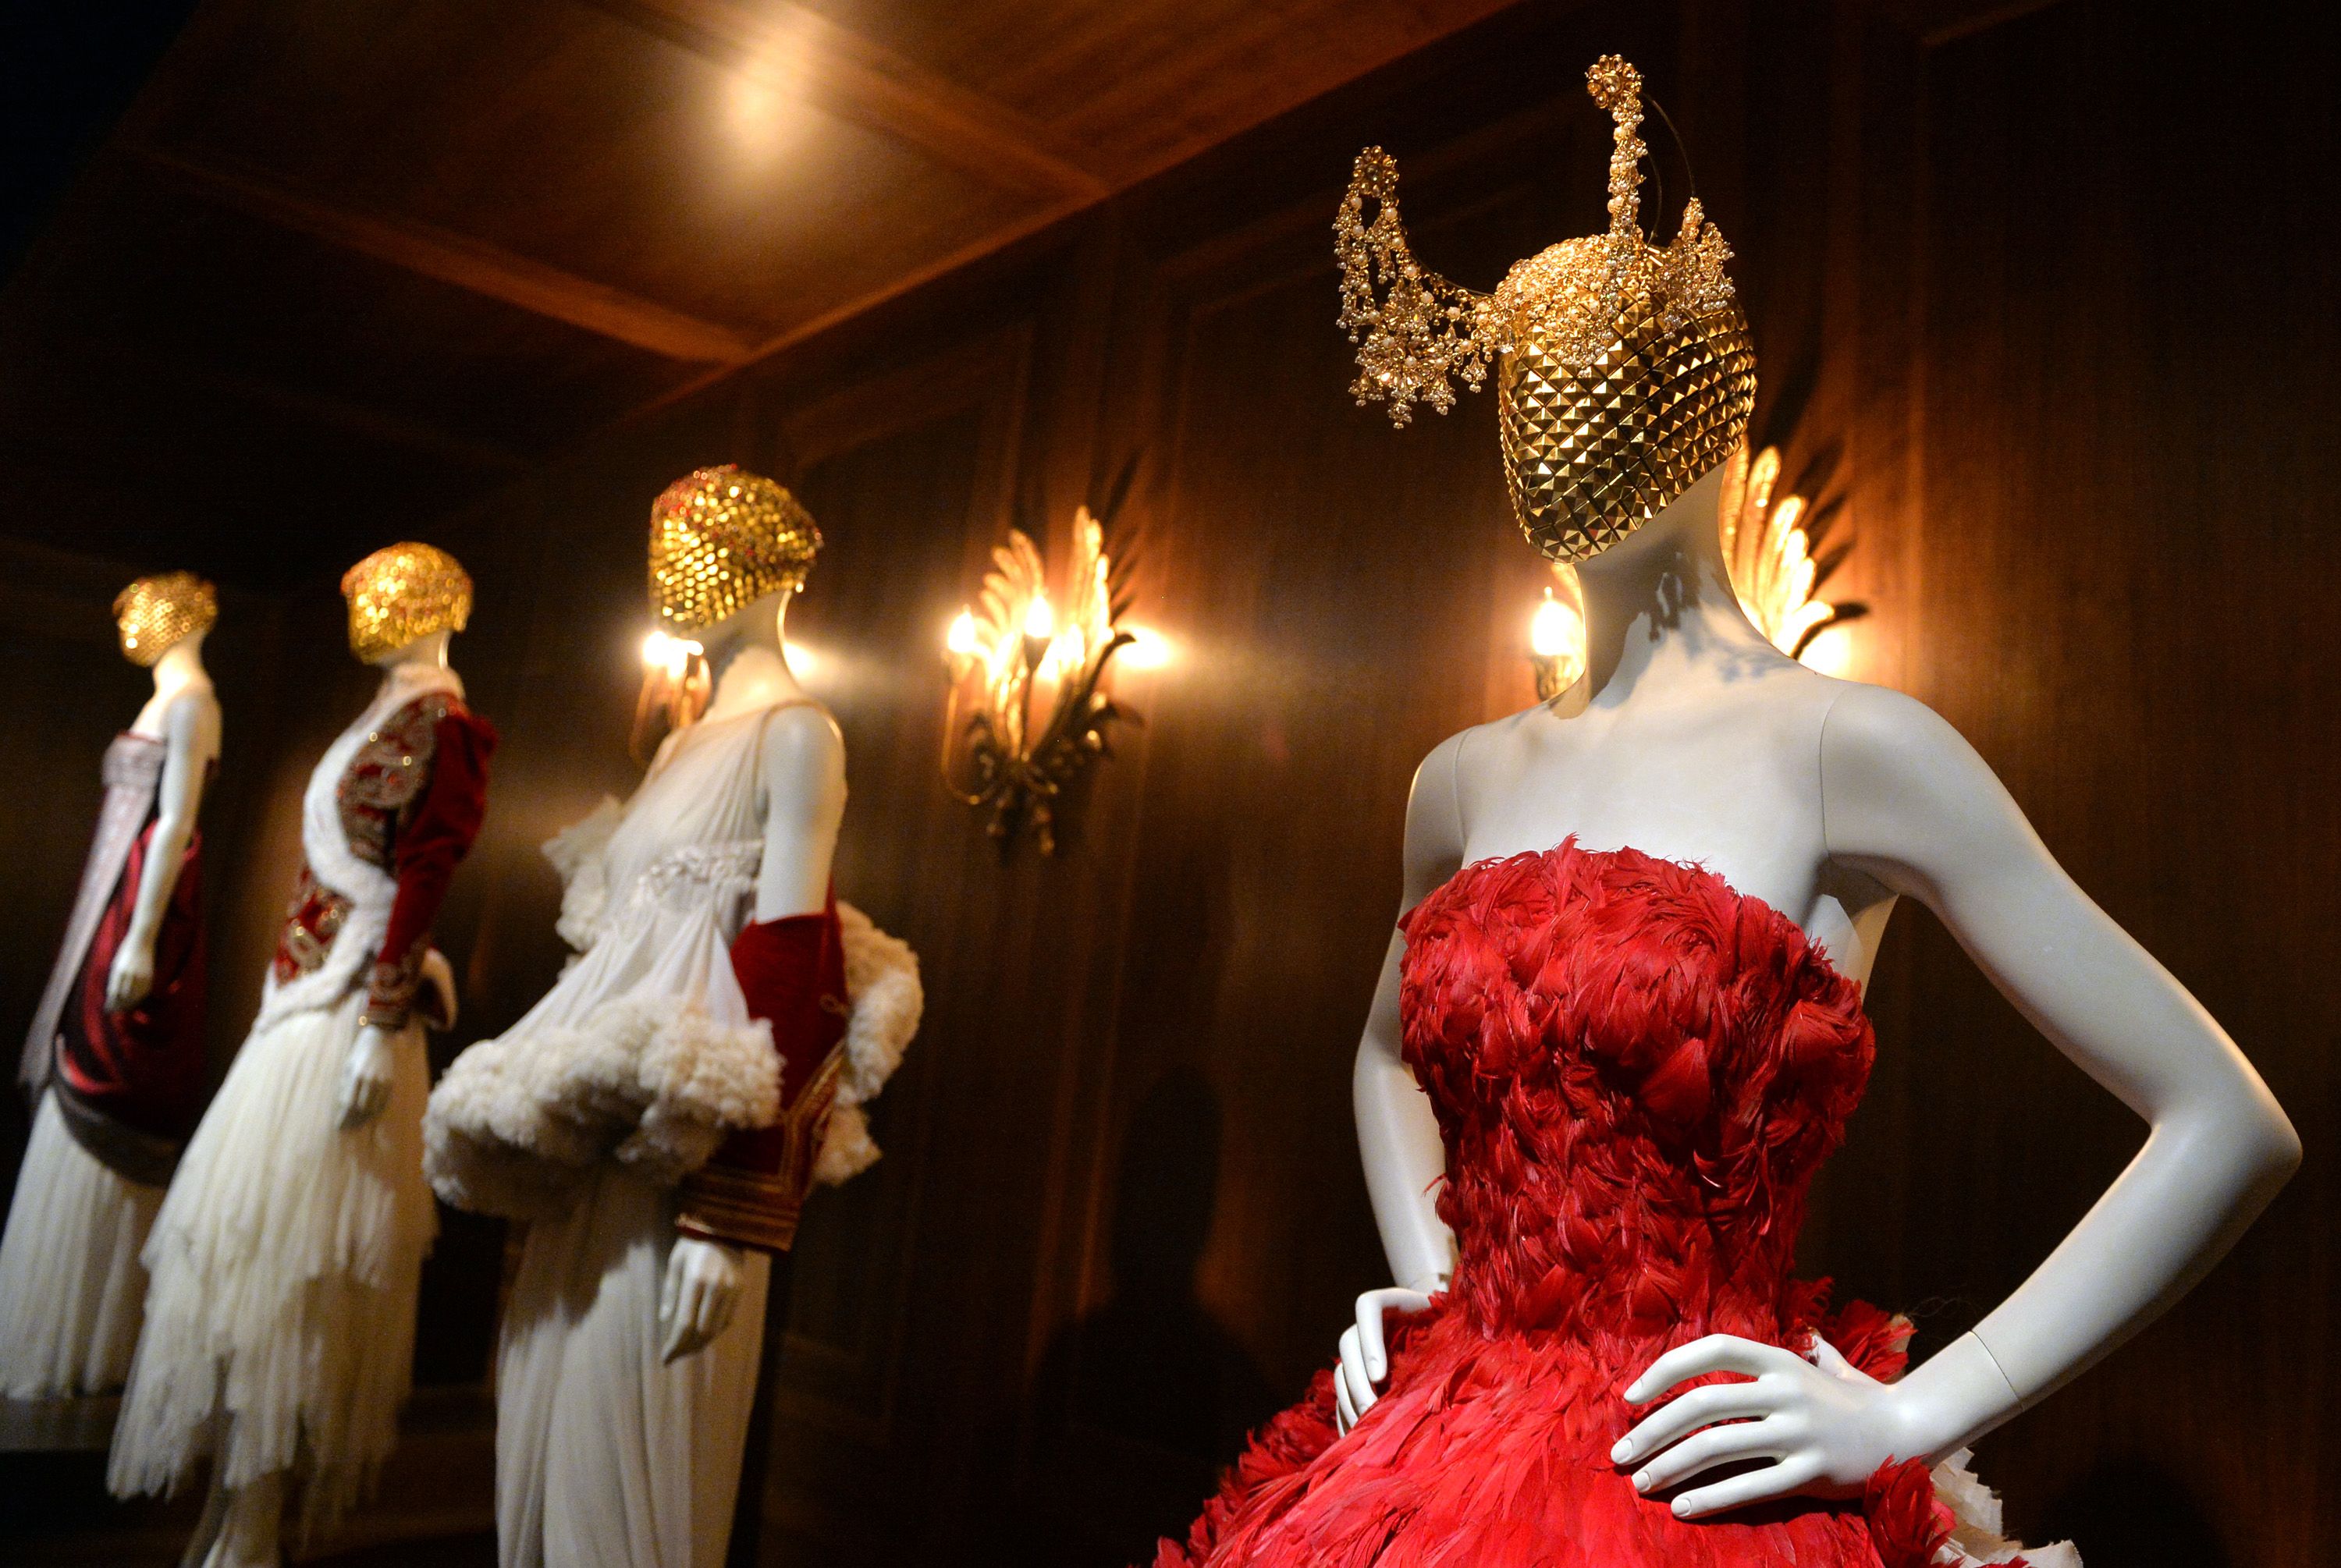 A Closer Look at Alexander McQueen's Achingly Beautiful Collection